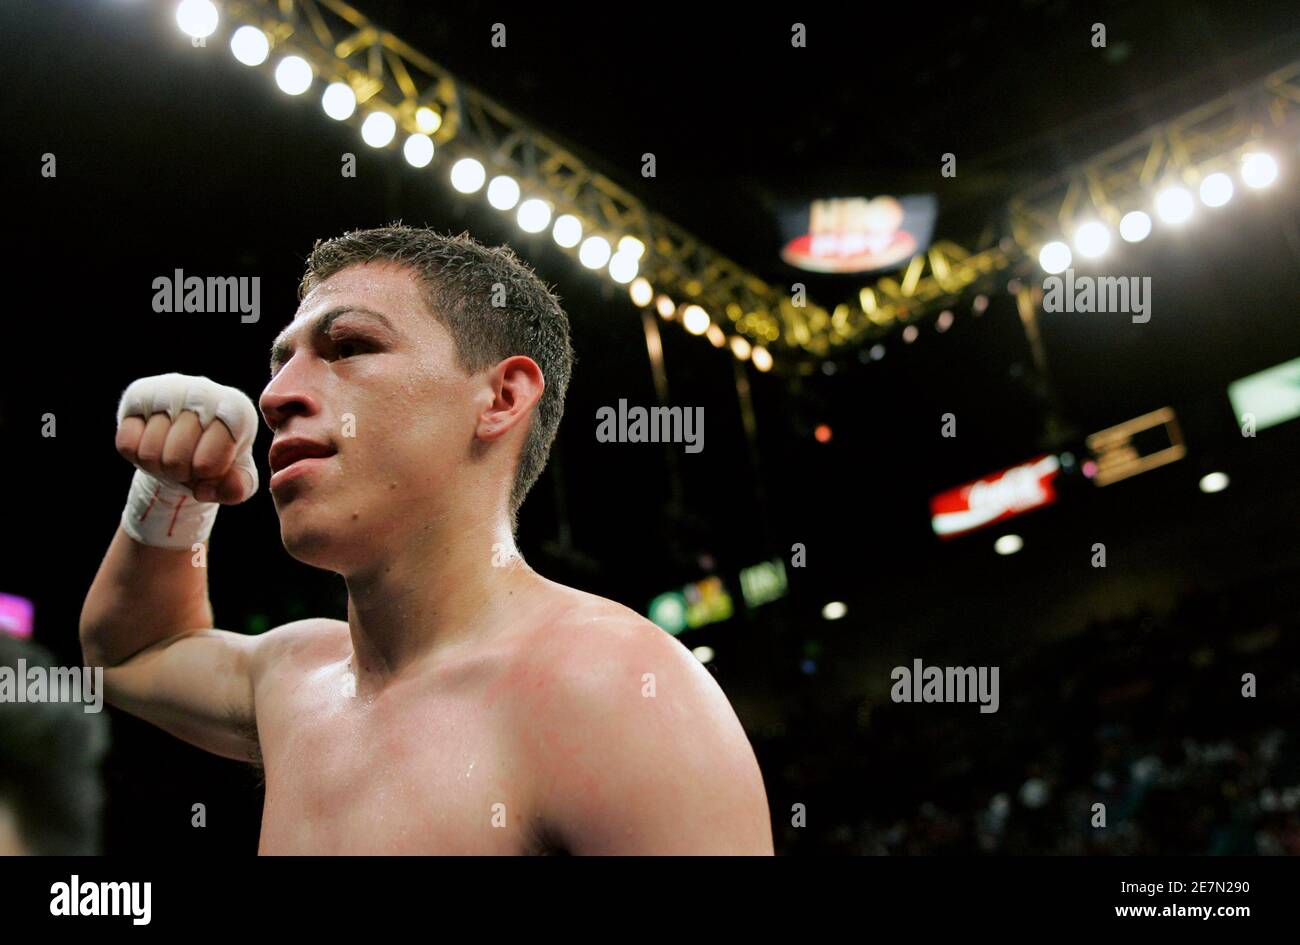 Lightweight boxer Jorge Paez Jr. celebrates his victory over Derrick Campos after a four-round bout at the MGM Grand Garden Arena in Las Vegas, Nevada September 16, 2006. REUTERS/Steve Marcus (UNITED STATES) Stock Photo